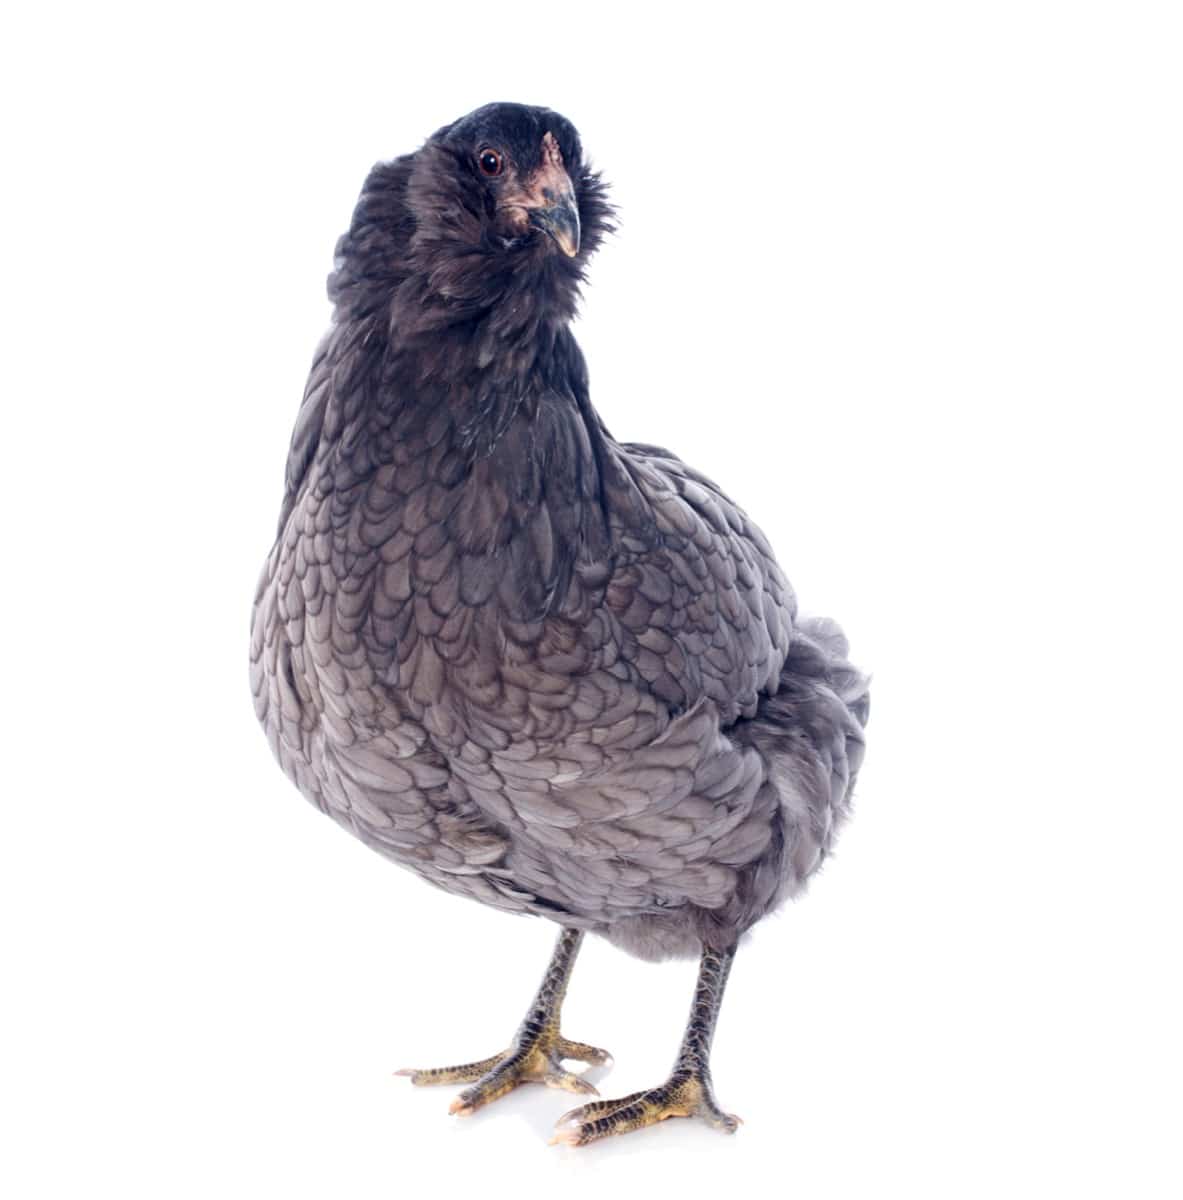 Chicken Breeds That Do Well in Cold Climates: Ameraucana